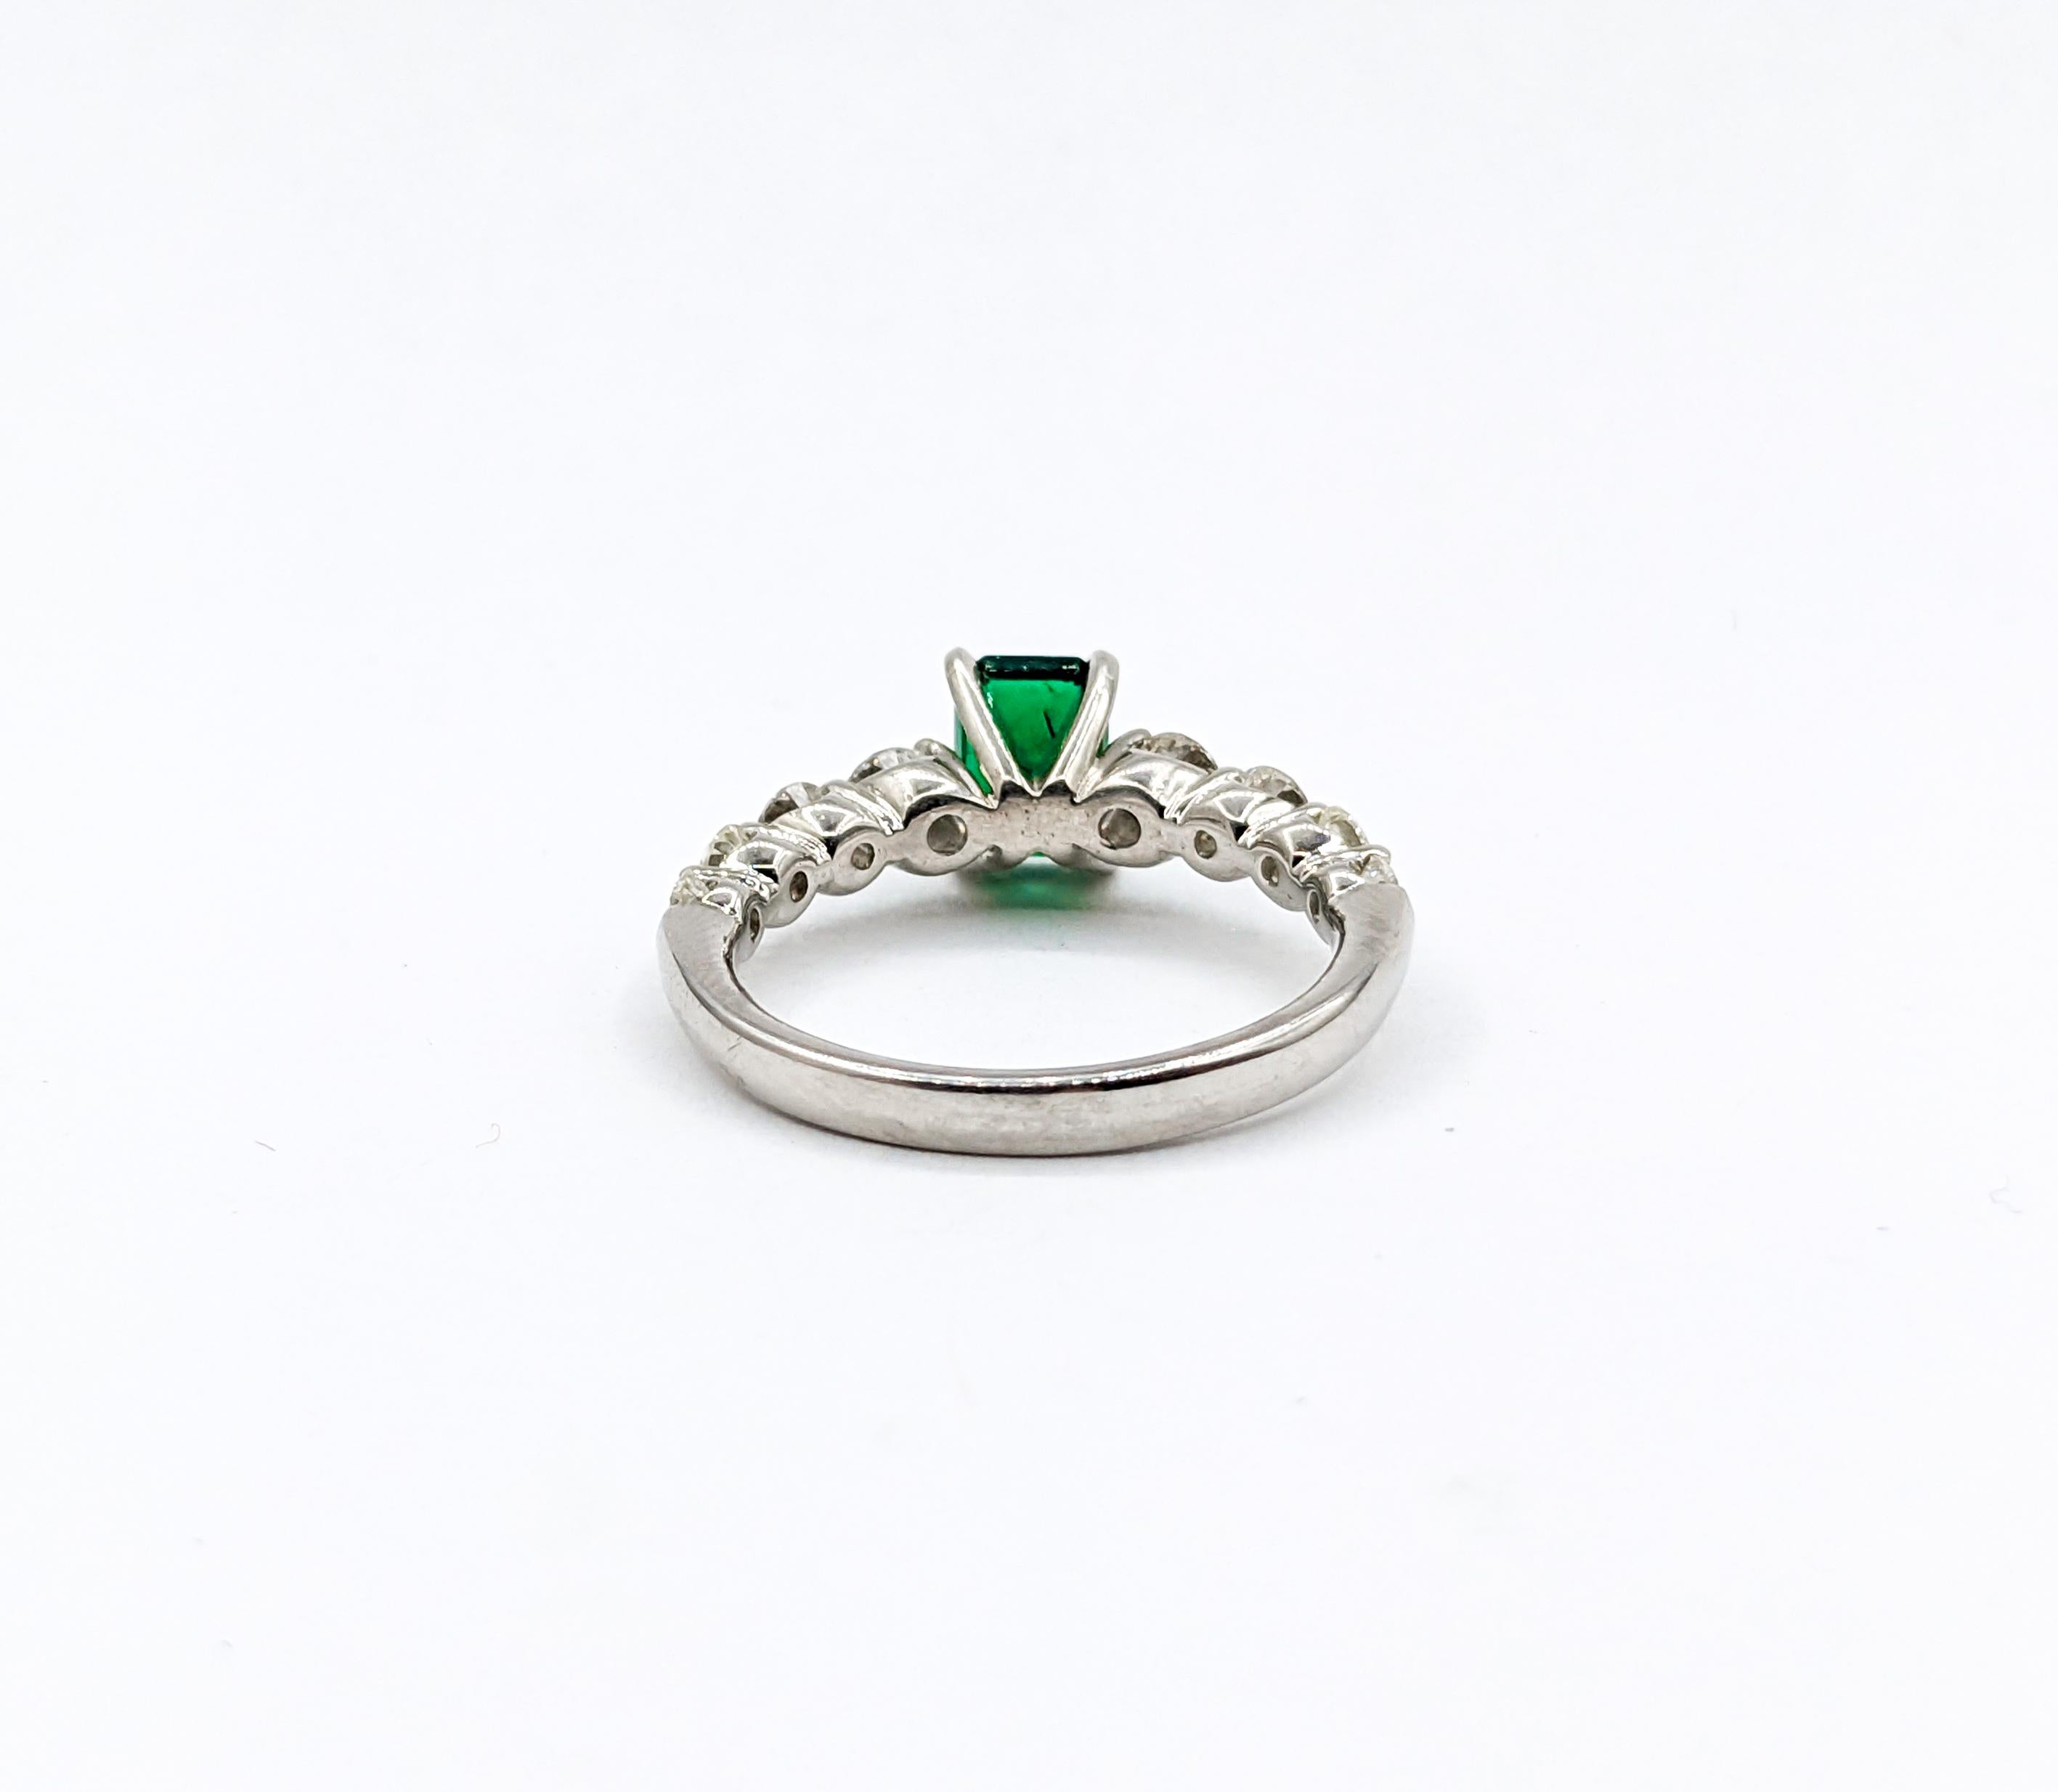 Stunning Emerald and Graduated Diamond Ring in 14K White Gold In Excellent Condition For Sale In Bloomington, MN